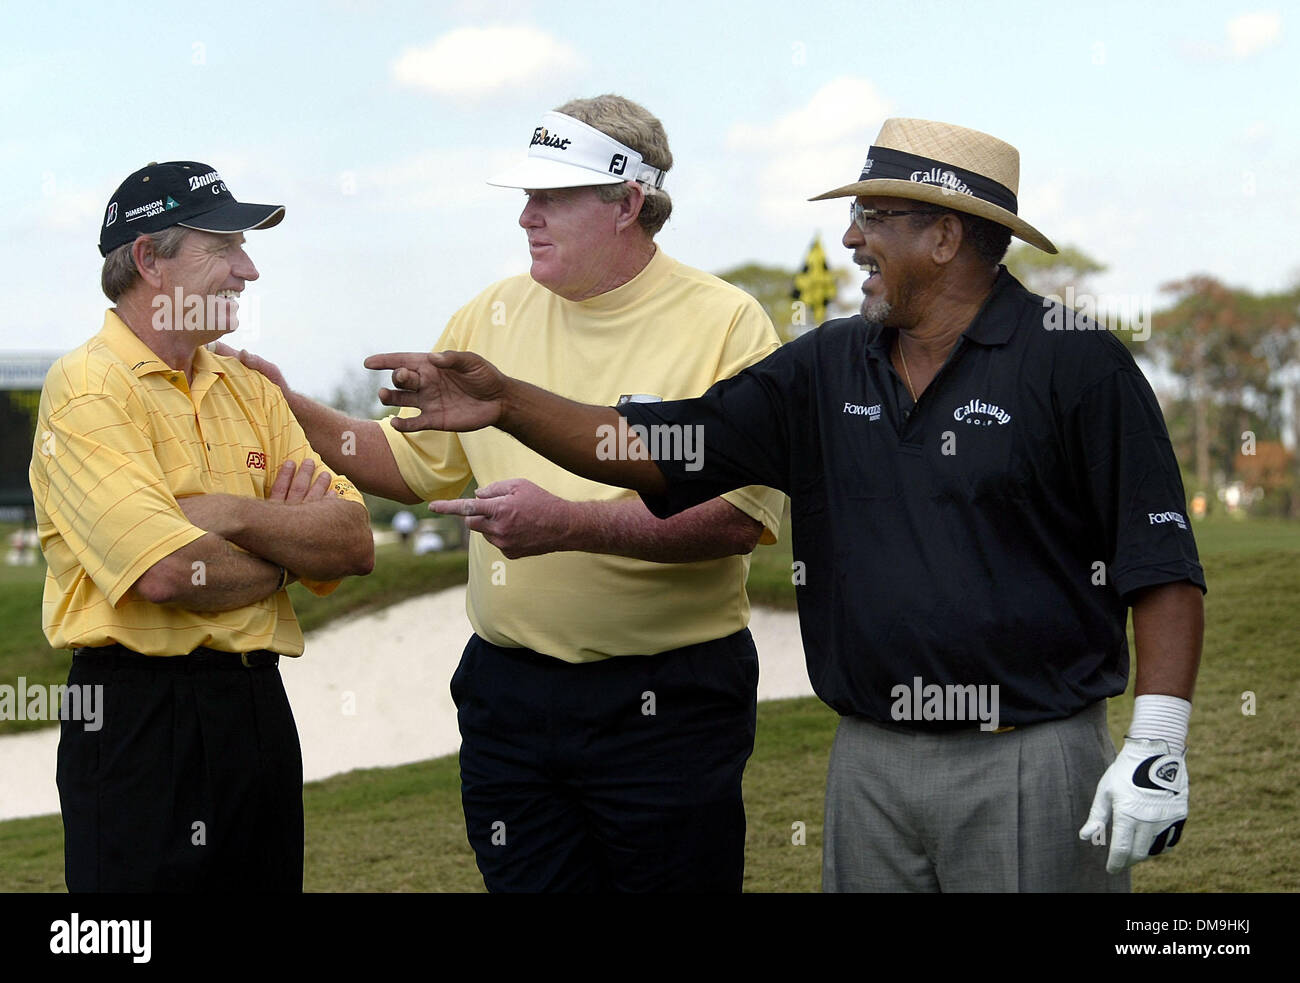 Feb 09, 2007 - Boca Raton, FL, USA - Champions tour rookie (l-r) NICK PRICE chats with  ANDY BEAN and JIM THORPE during play in the Allianz Championship on The Old Course at Broken Sound Club, Friday. Price had just finished the front nine and ran into the pair as he headed for the 10th tee. (Credit Image: © Bob Shanley/Palm Beach Post/ZUMA Press) RESTRICTIONS: USA Tabloid RIGHTS O Stock Photo